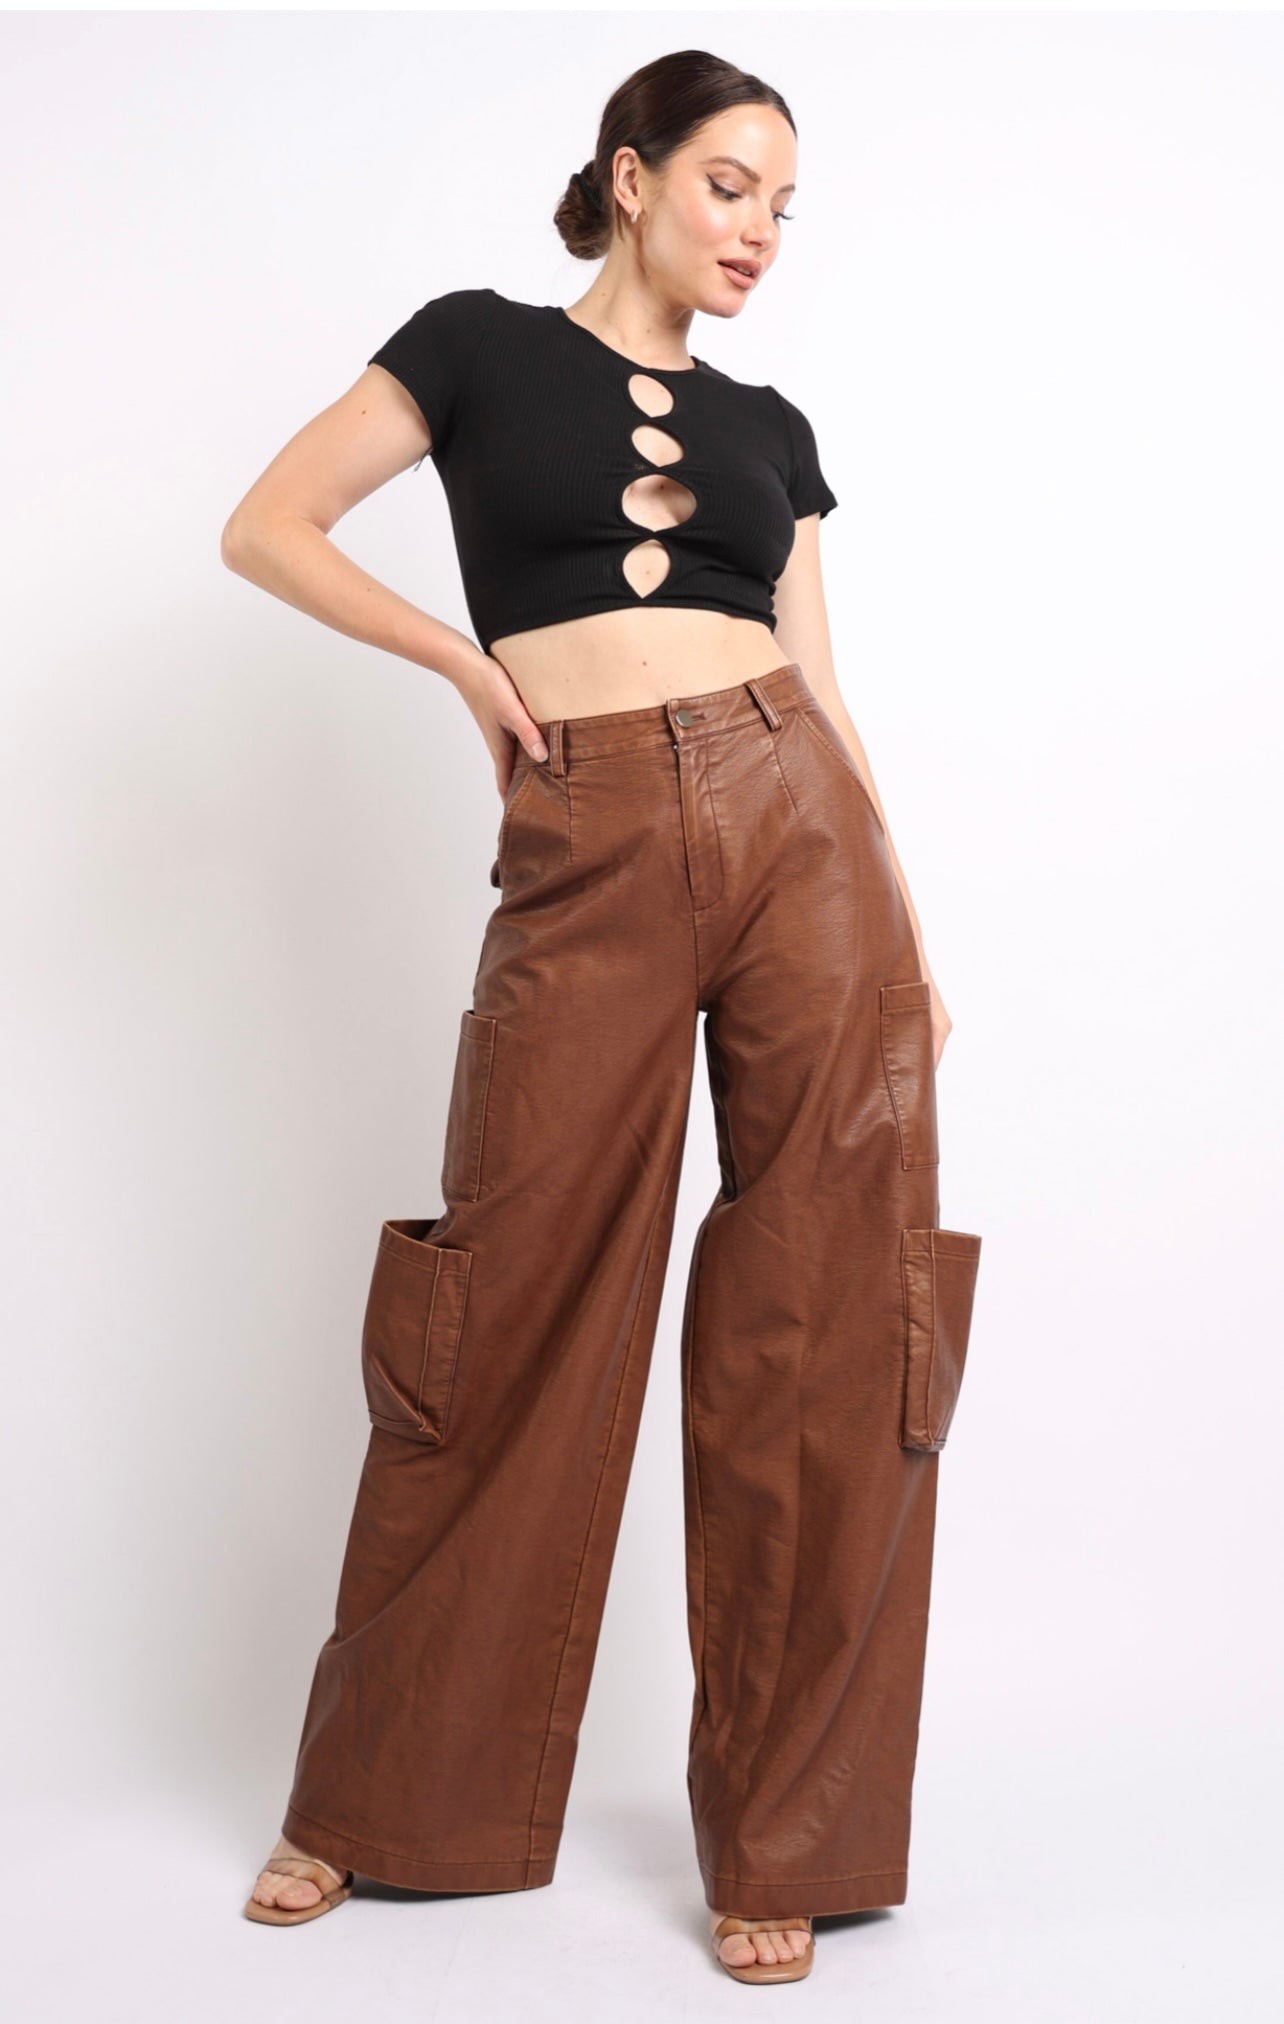 FLOW PANTS– Its Chic By Chantele